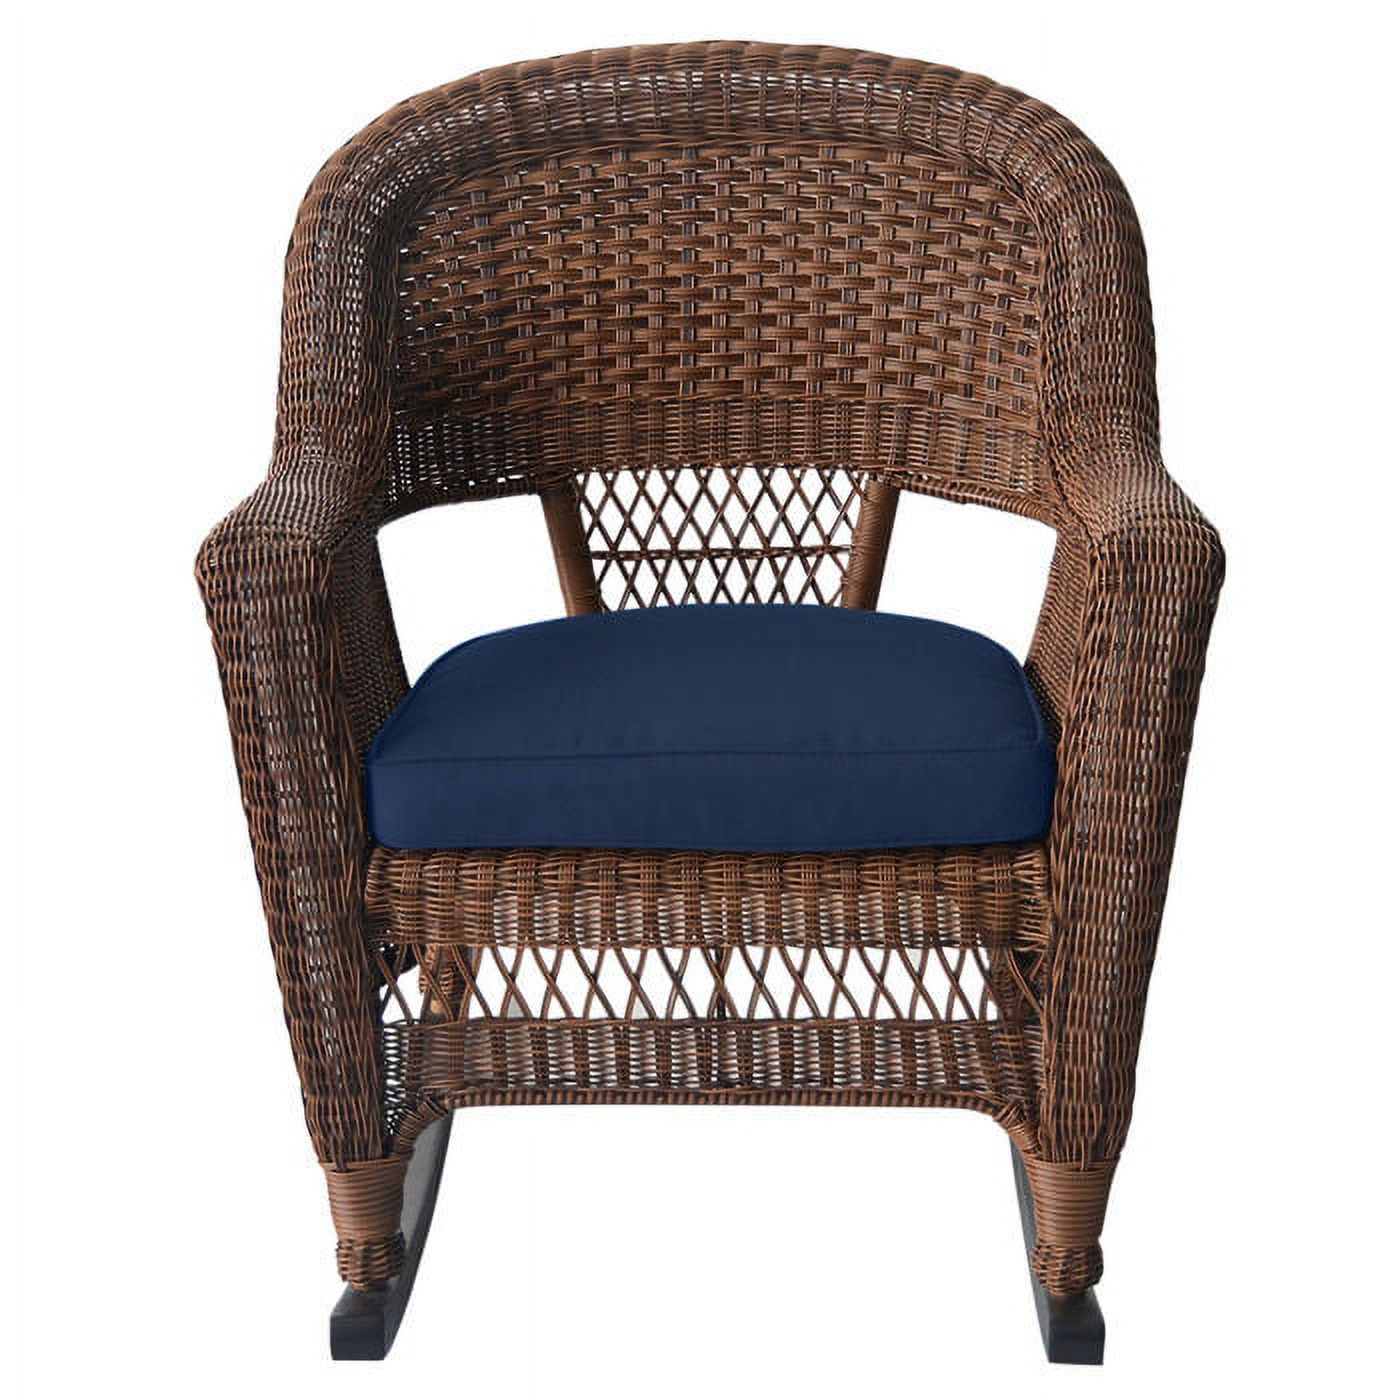 Jeco 3pc Rocker Wicker Chair Set With Red Cushion-Finish:Black - image 2 of 4